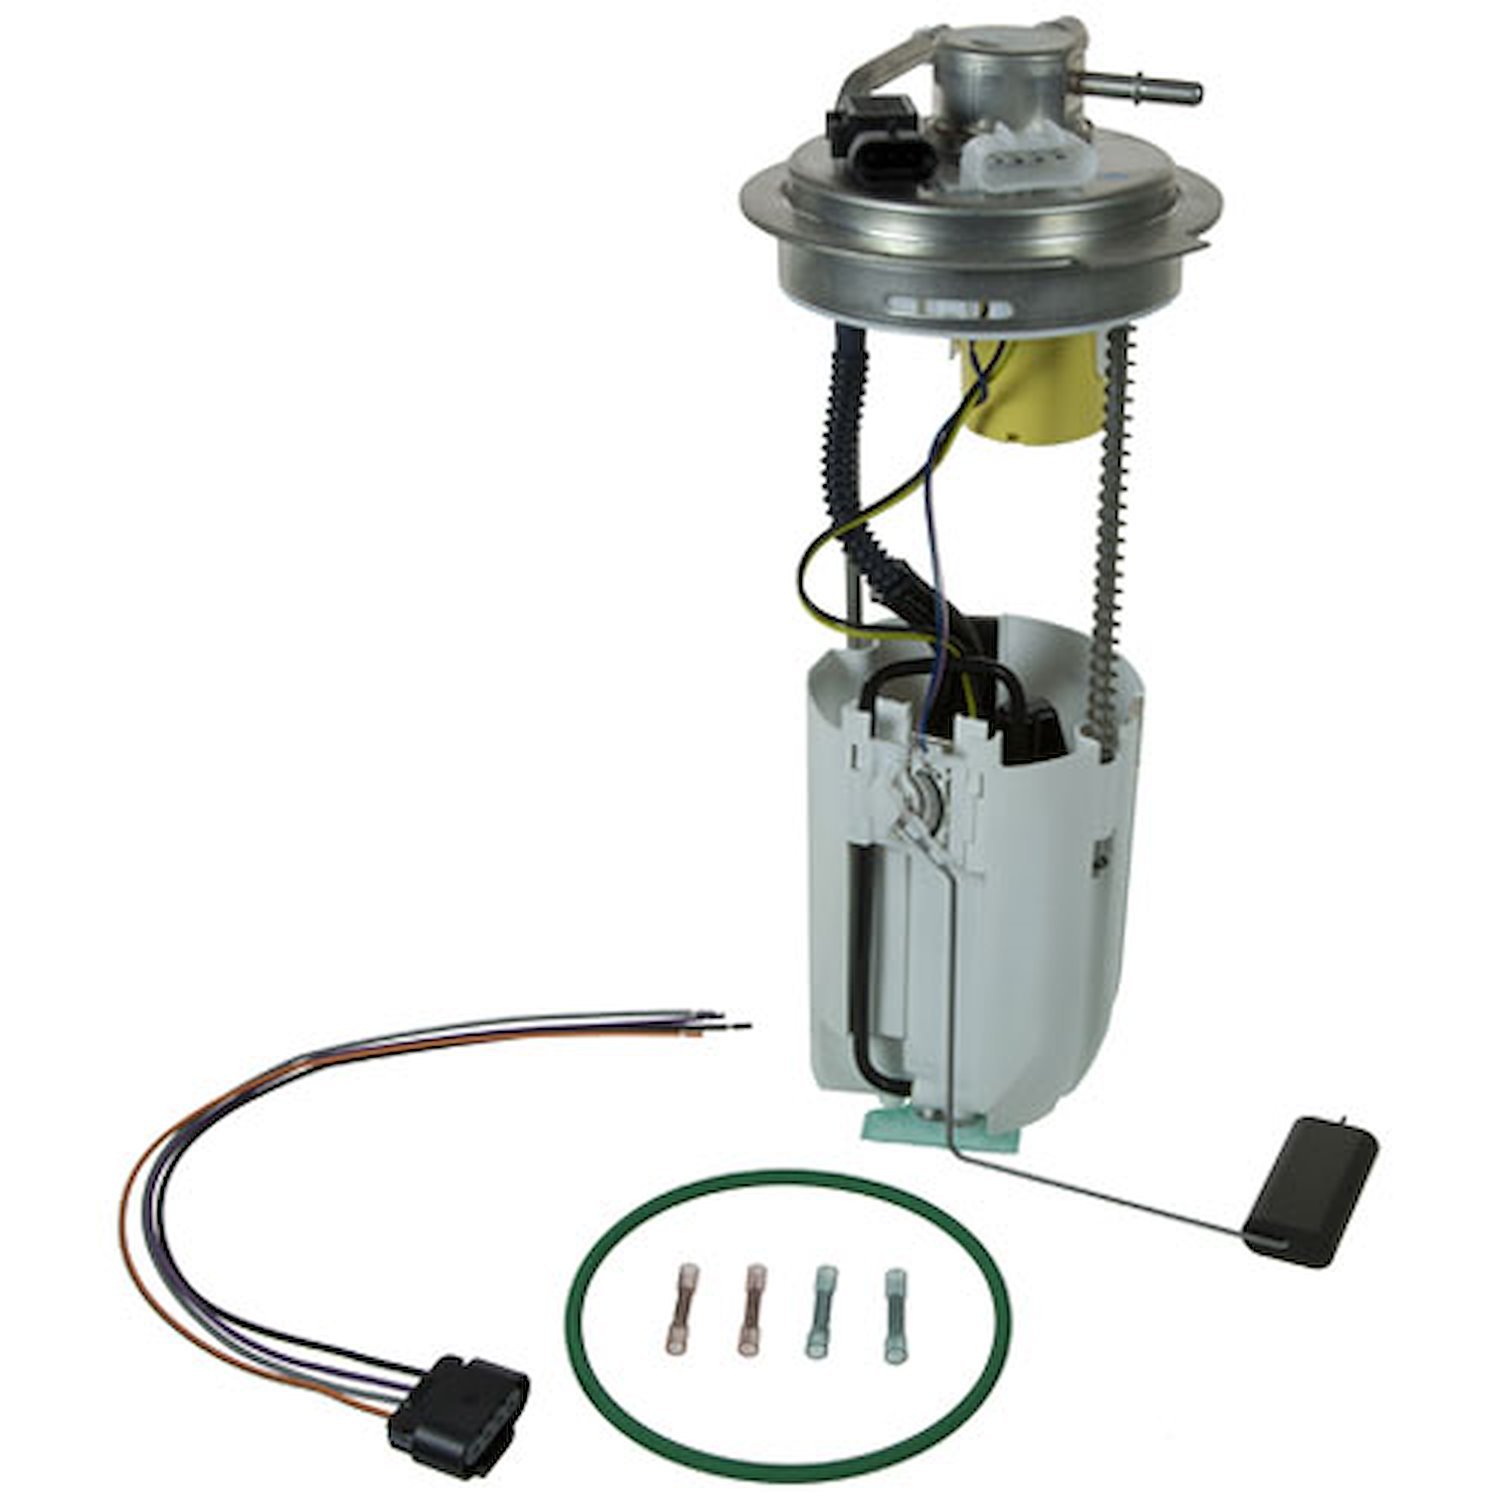 OE GM Replacement Electric Fuel Pump Module Assembly 2004-07 Chevrolet Silverado 1500/2500/2500HD/3500